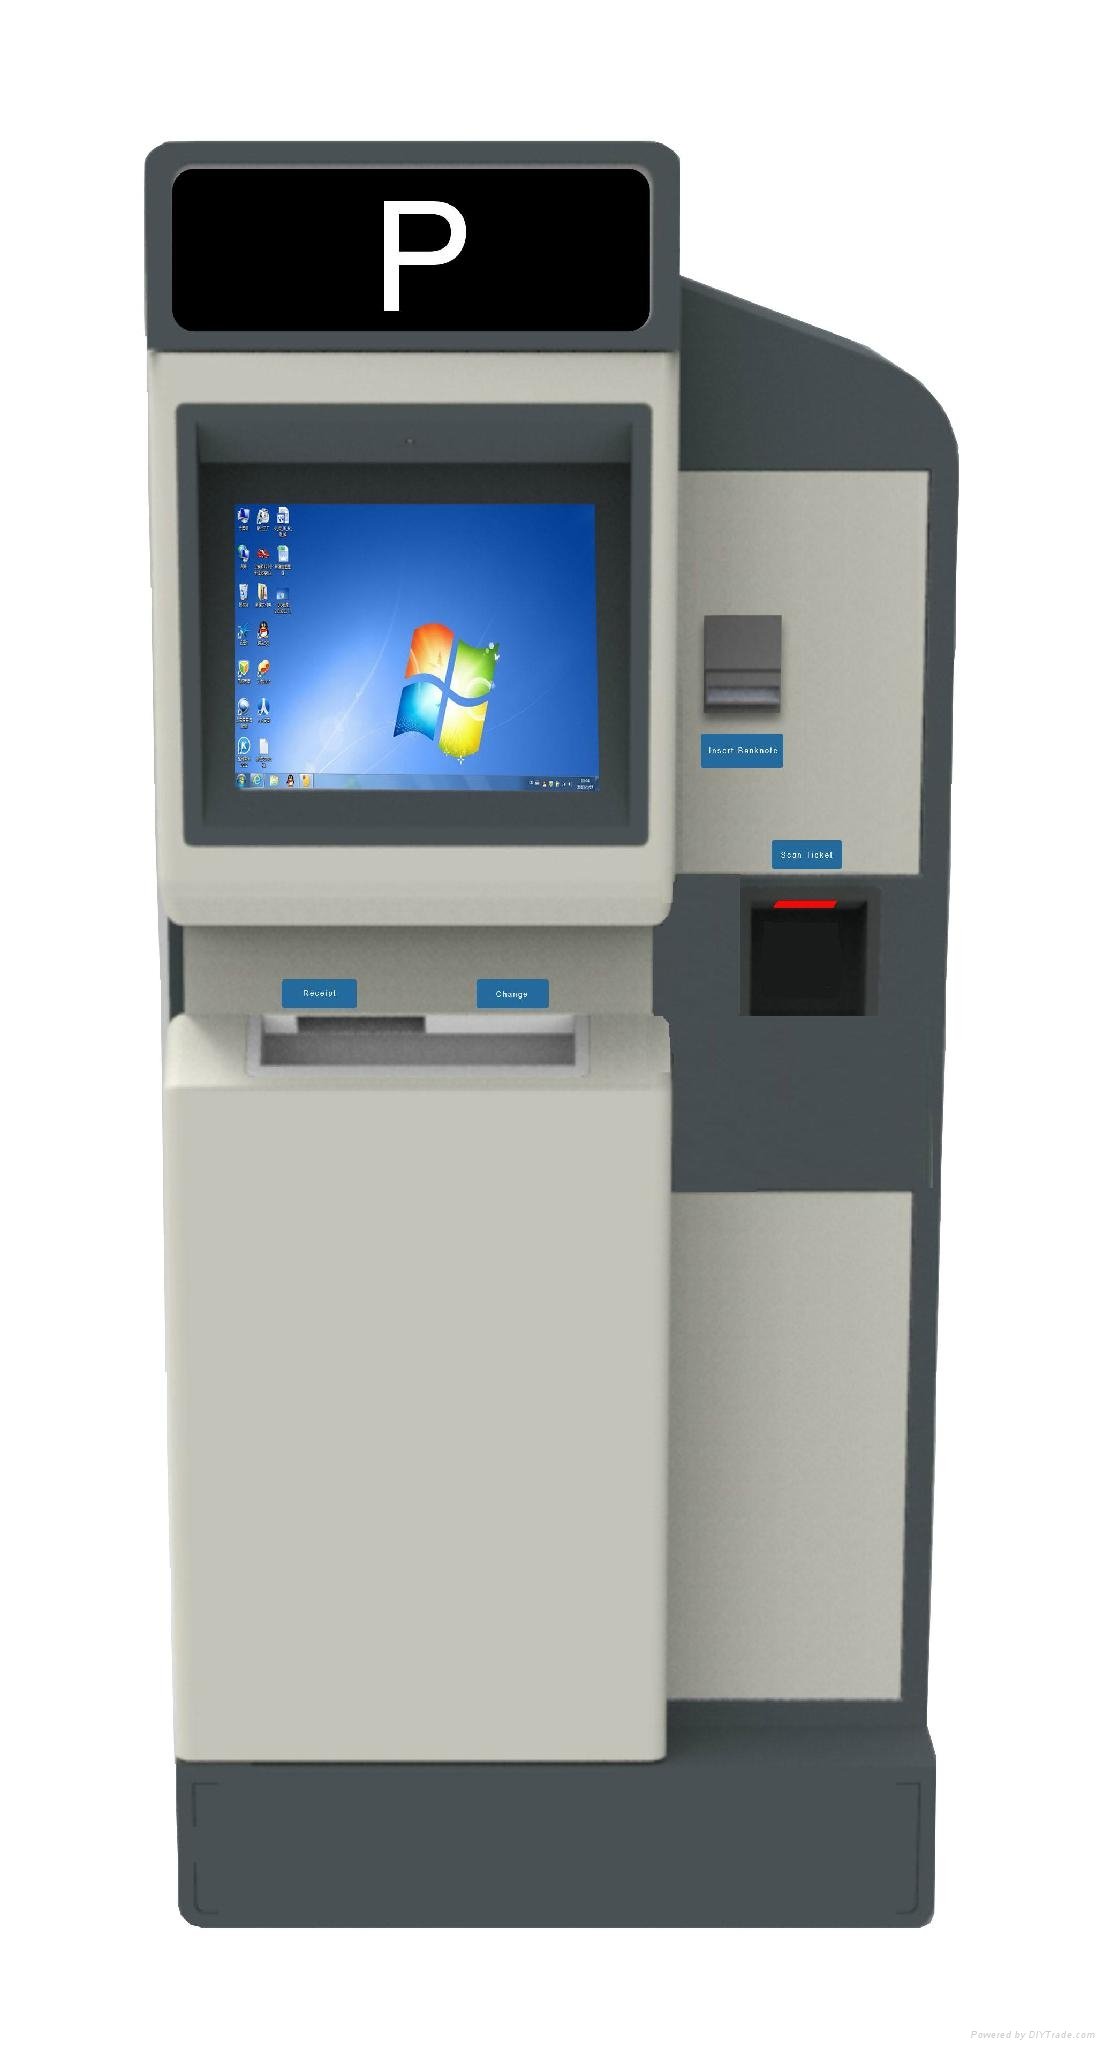 PS9 pay terminal for parking 